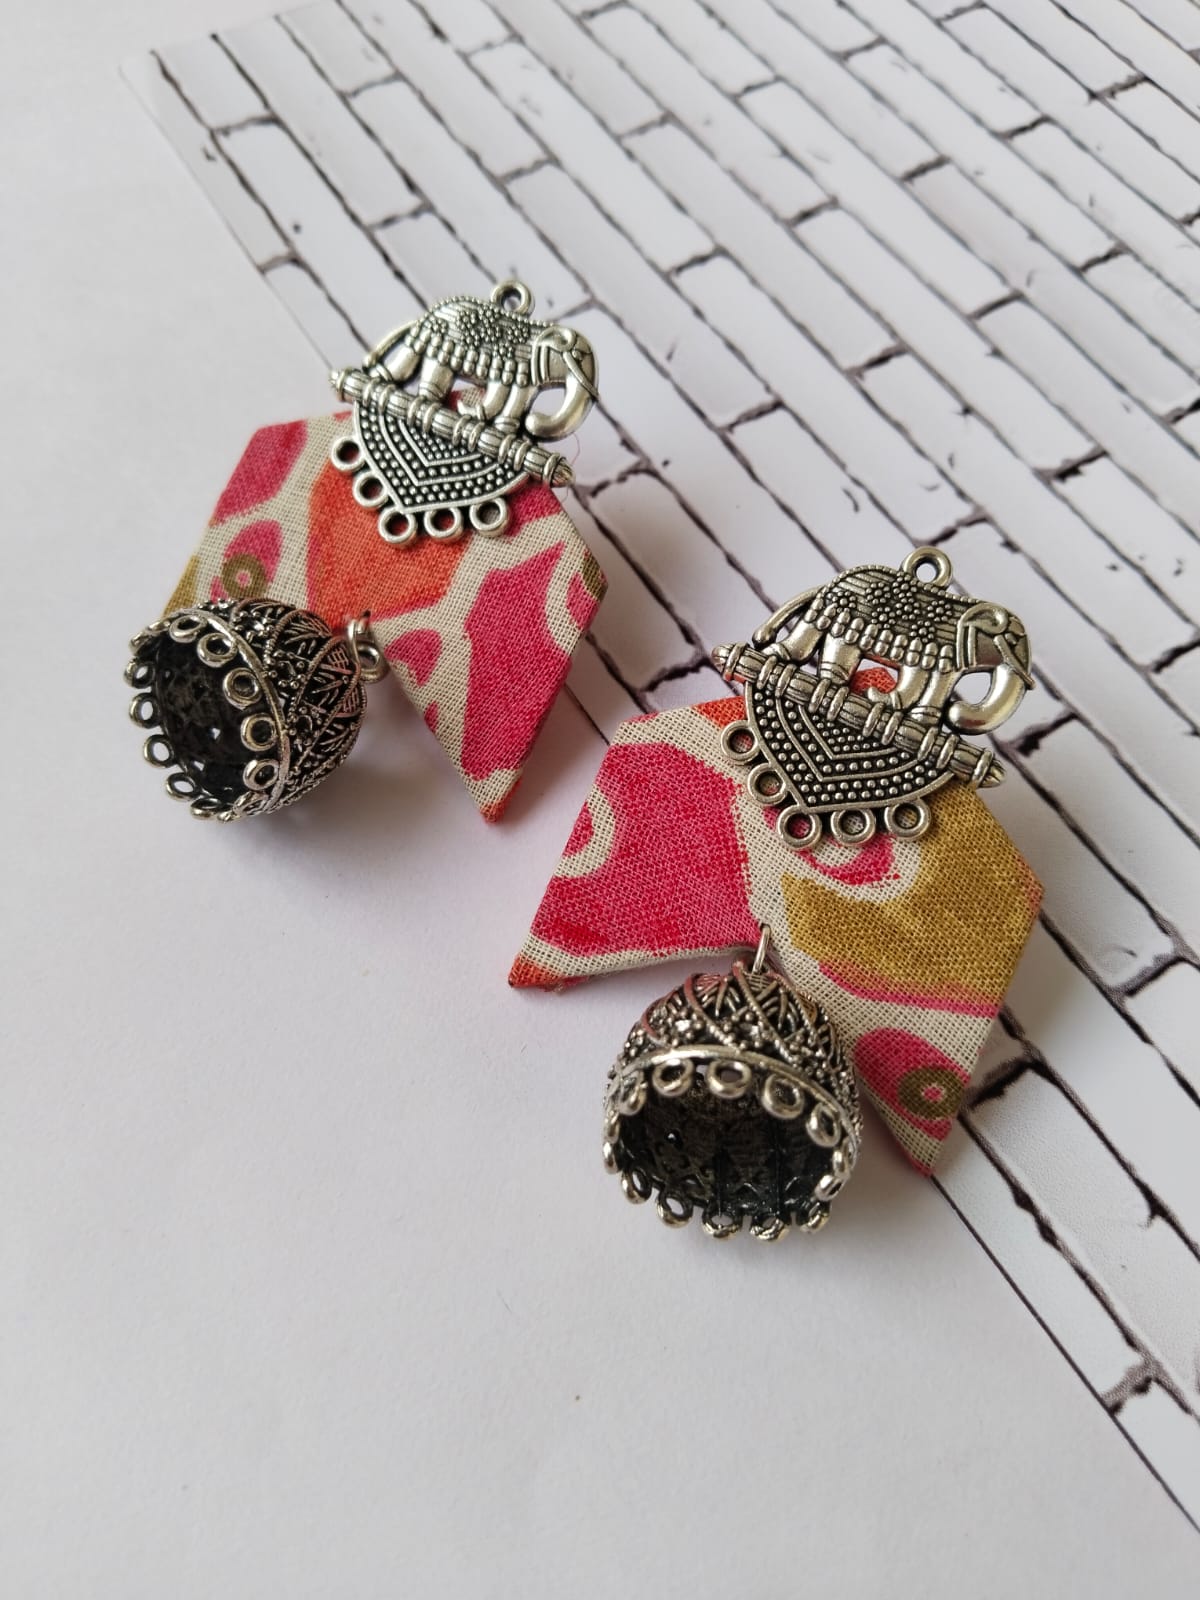 Pink floral printed earrings with silver charm on white backdrop